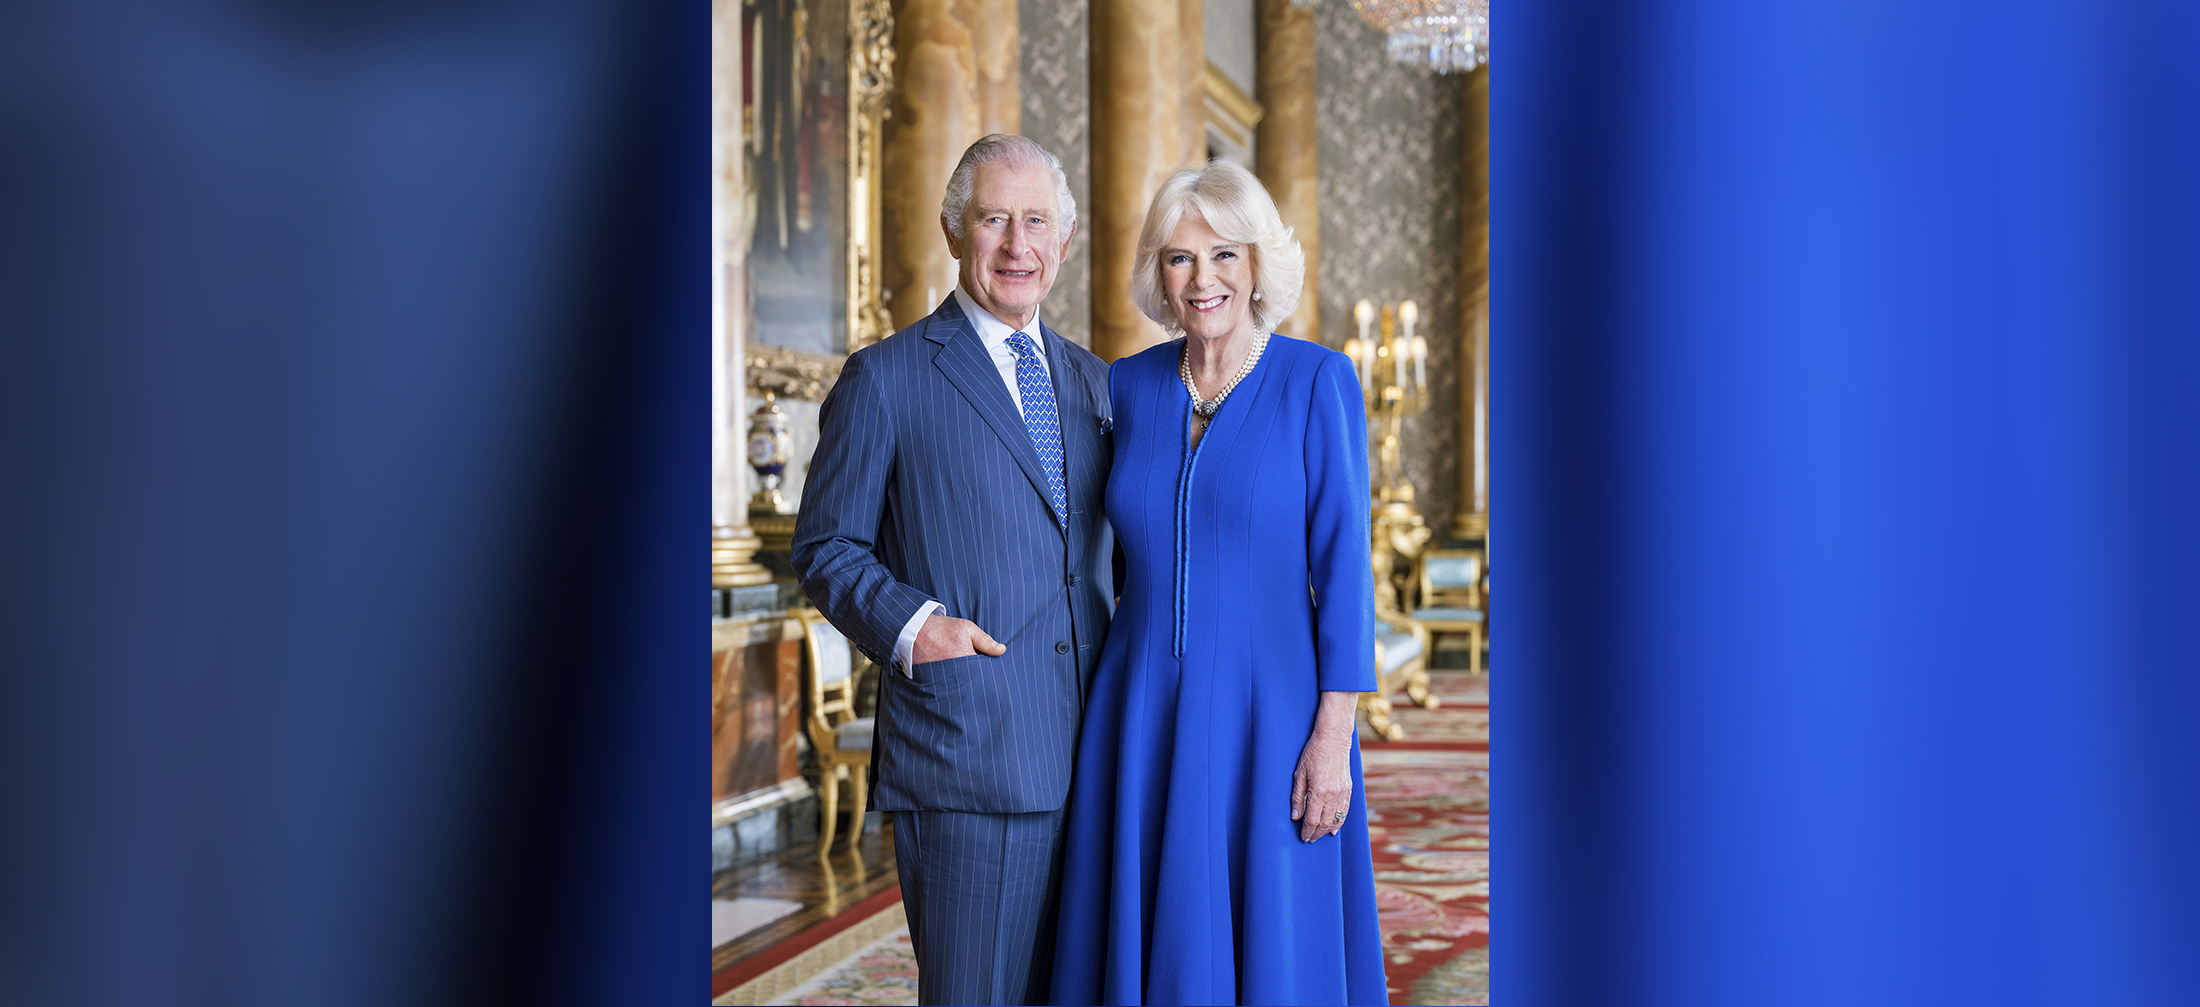 PHOTO: In this photo provided by Buckingham Palace on April 4, 2023, Britain's King Charles III and Camilla, the Queen Consort pose for a photo in the Blue Drawing Room at Buckingham Palace, London.